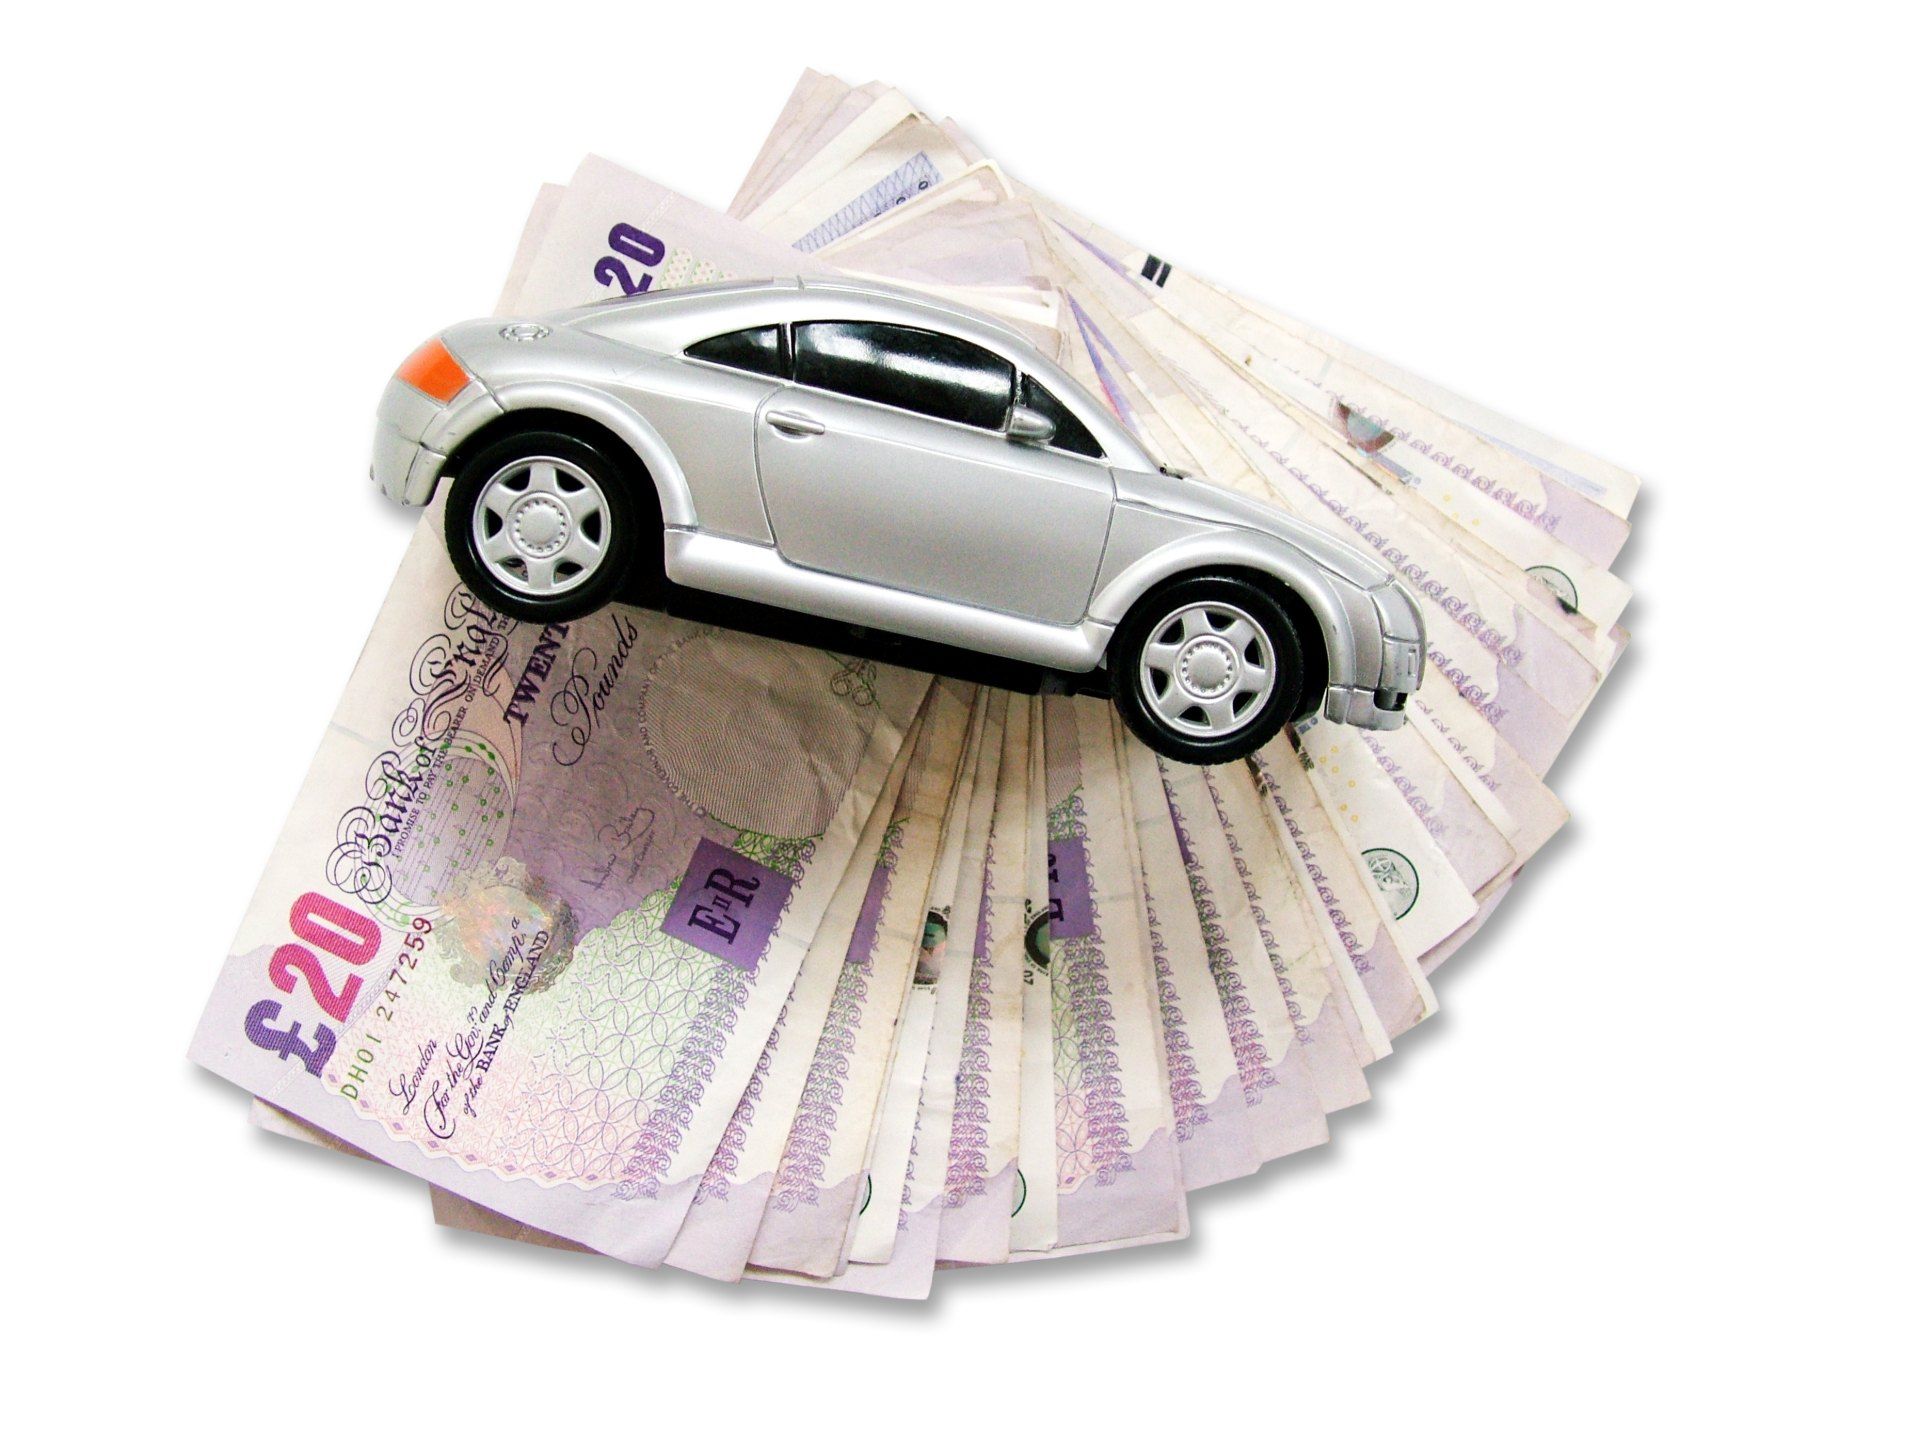 Model car on top of stack of British pounds - motor financing